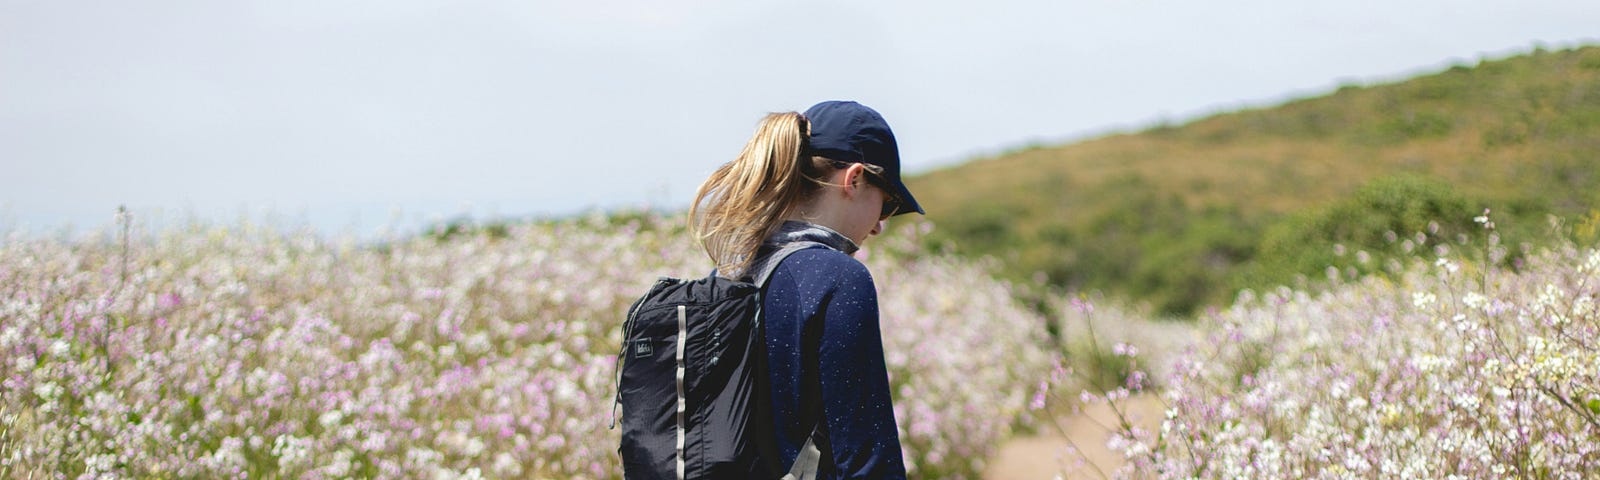 A woman walking along a path surrounded by flowers.